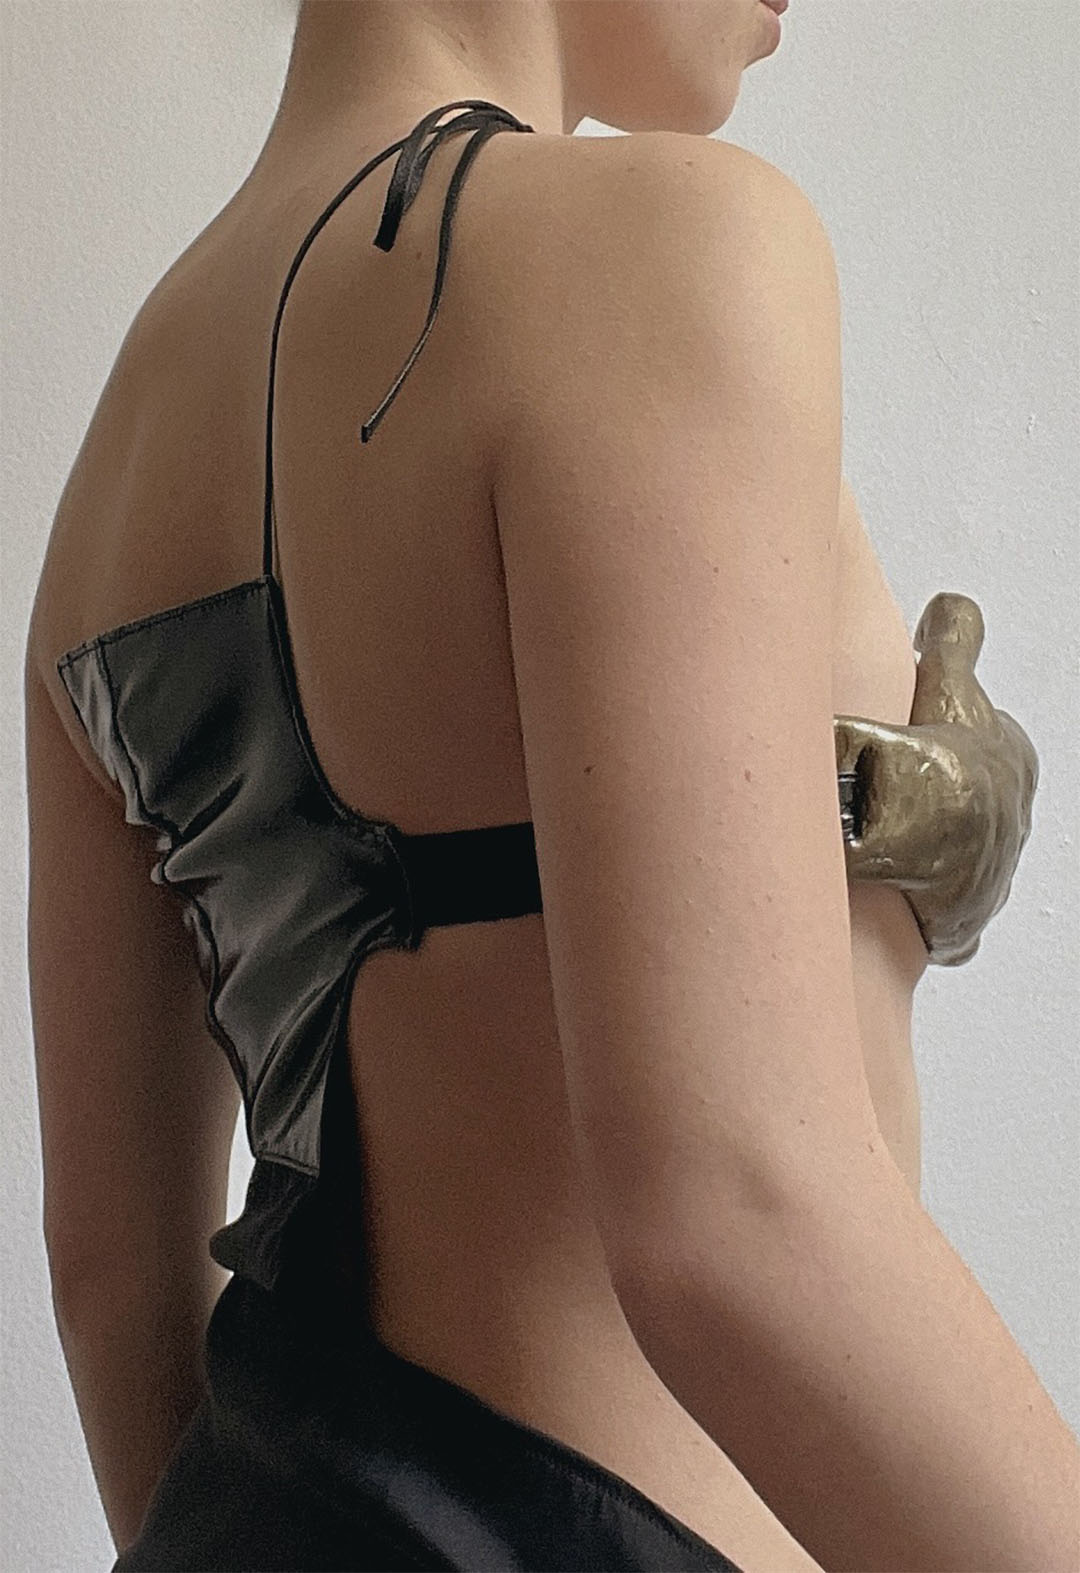 Close up of a girl showing her back at a three-quarter view. She is wearing the dress described previously with the cutout side closest to the camera.